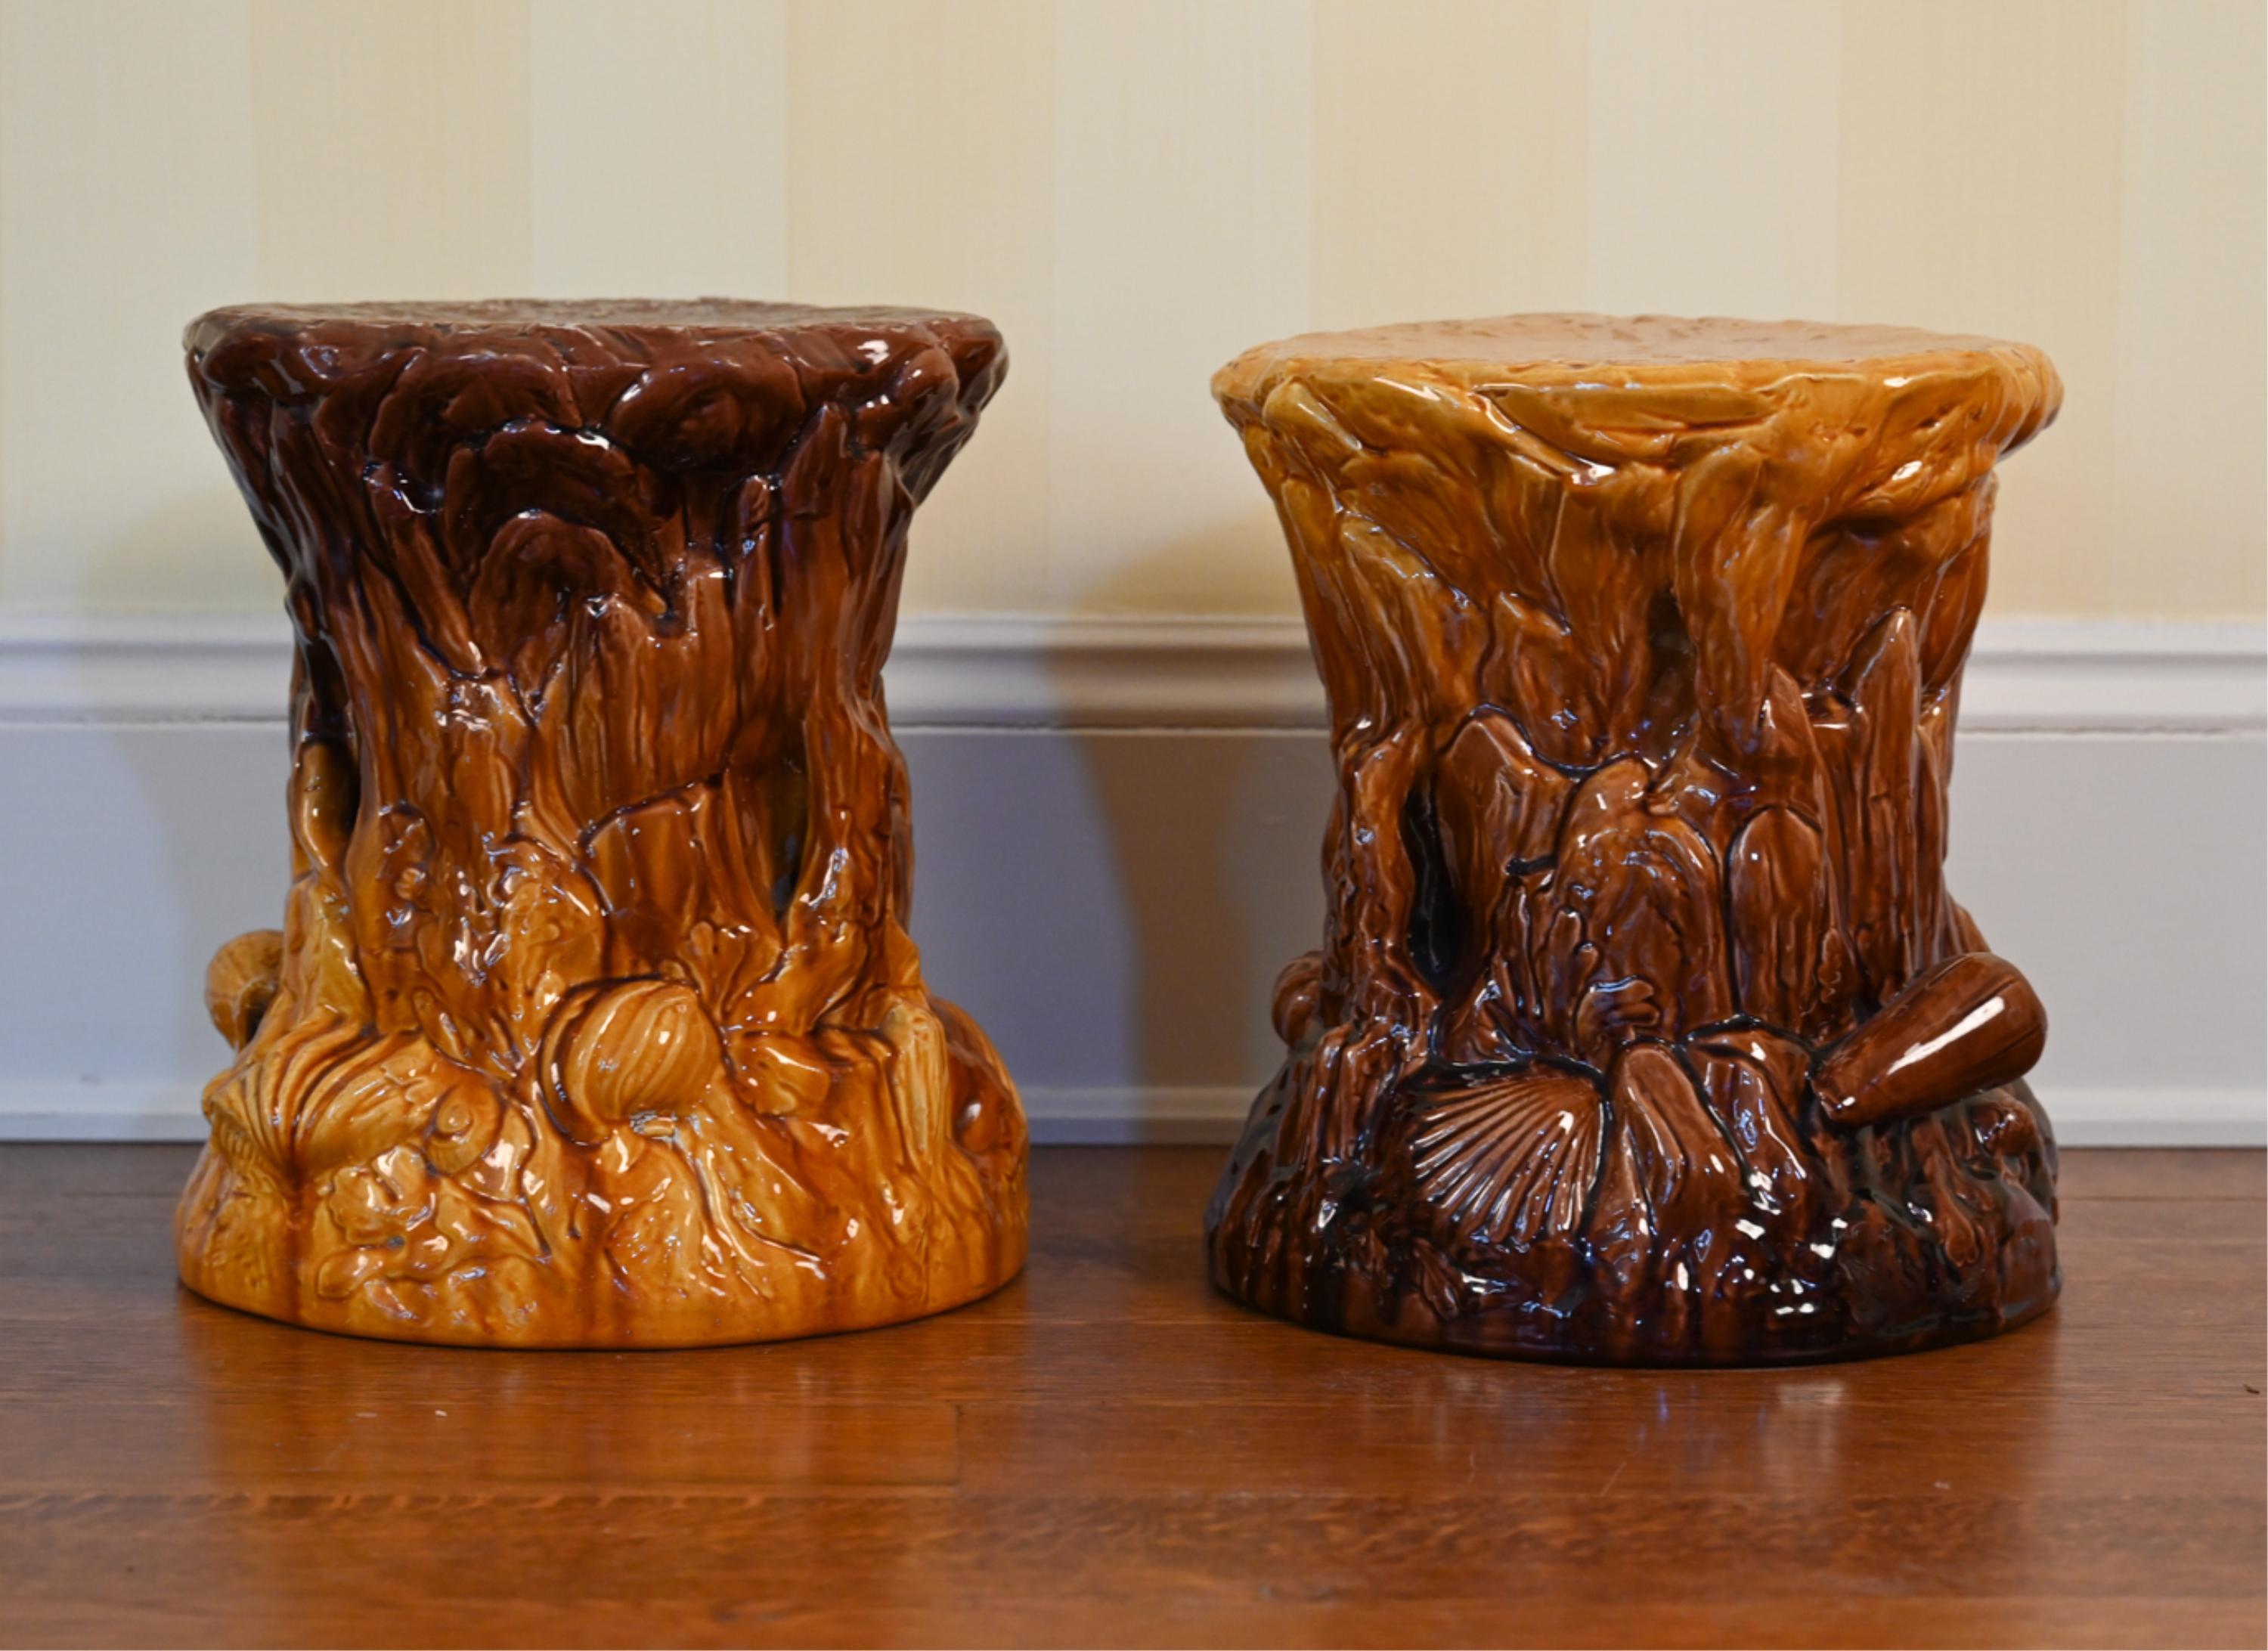 Coordinated pair of antique ceramic garden stools or jardiniere stands in caramel and brown glaze, with coral and aquatic life motifs in high relief. One slightly taller than the other, both with impressed Bretby England marks inside.